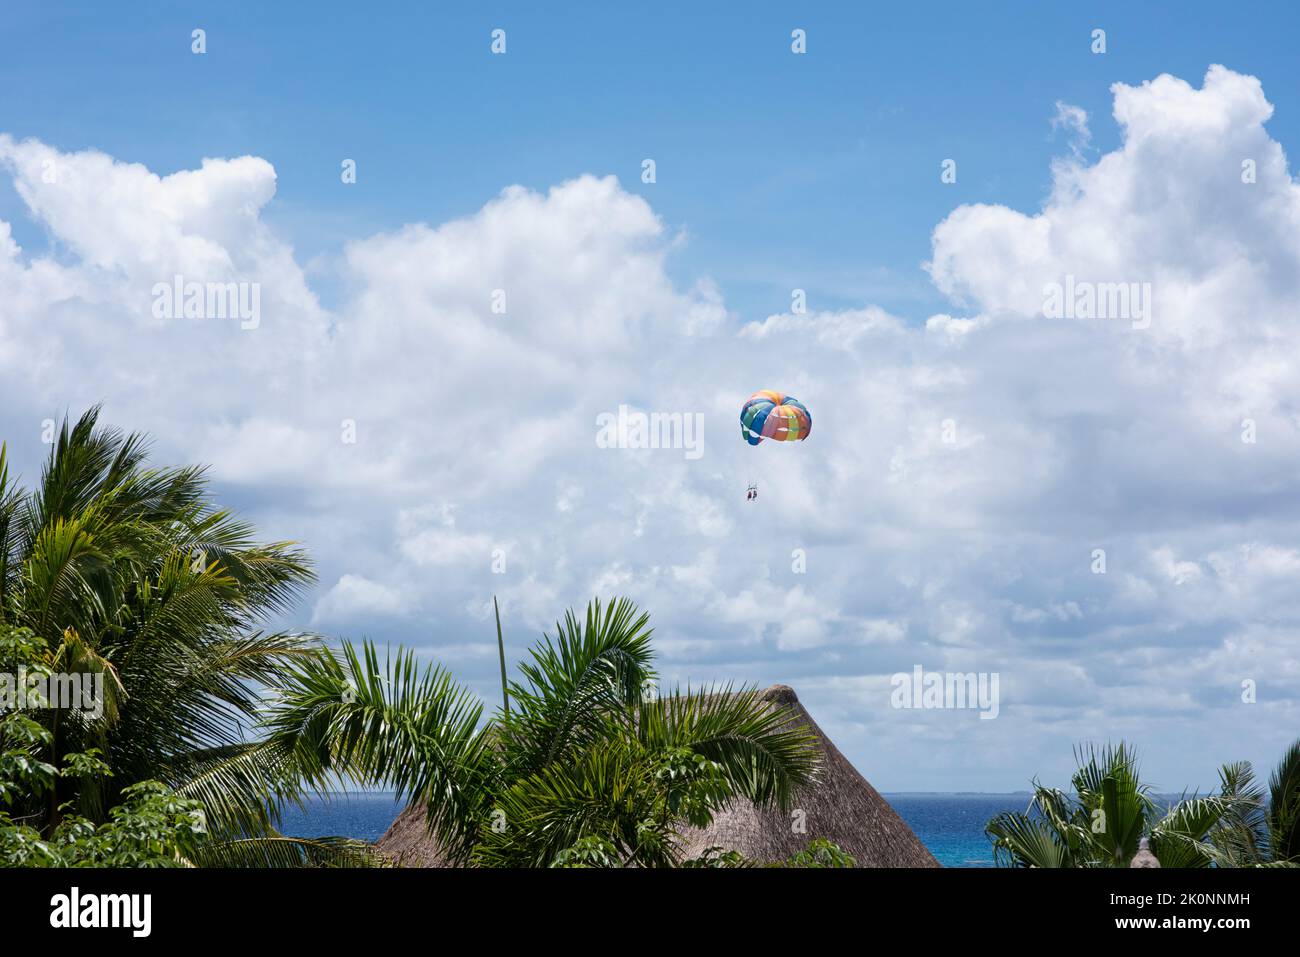 Tourists on parasailing against blue sky and white clouds, fly over palm trees at a tropical beach in Mexico Stock Photo